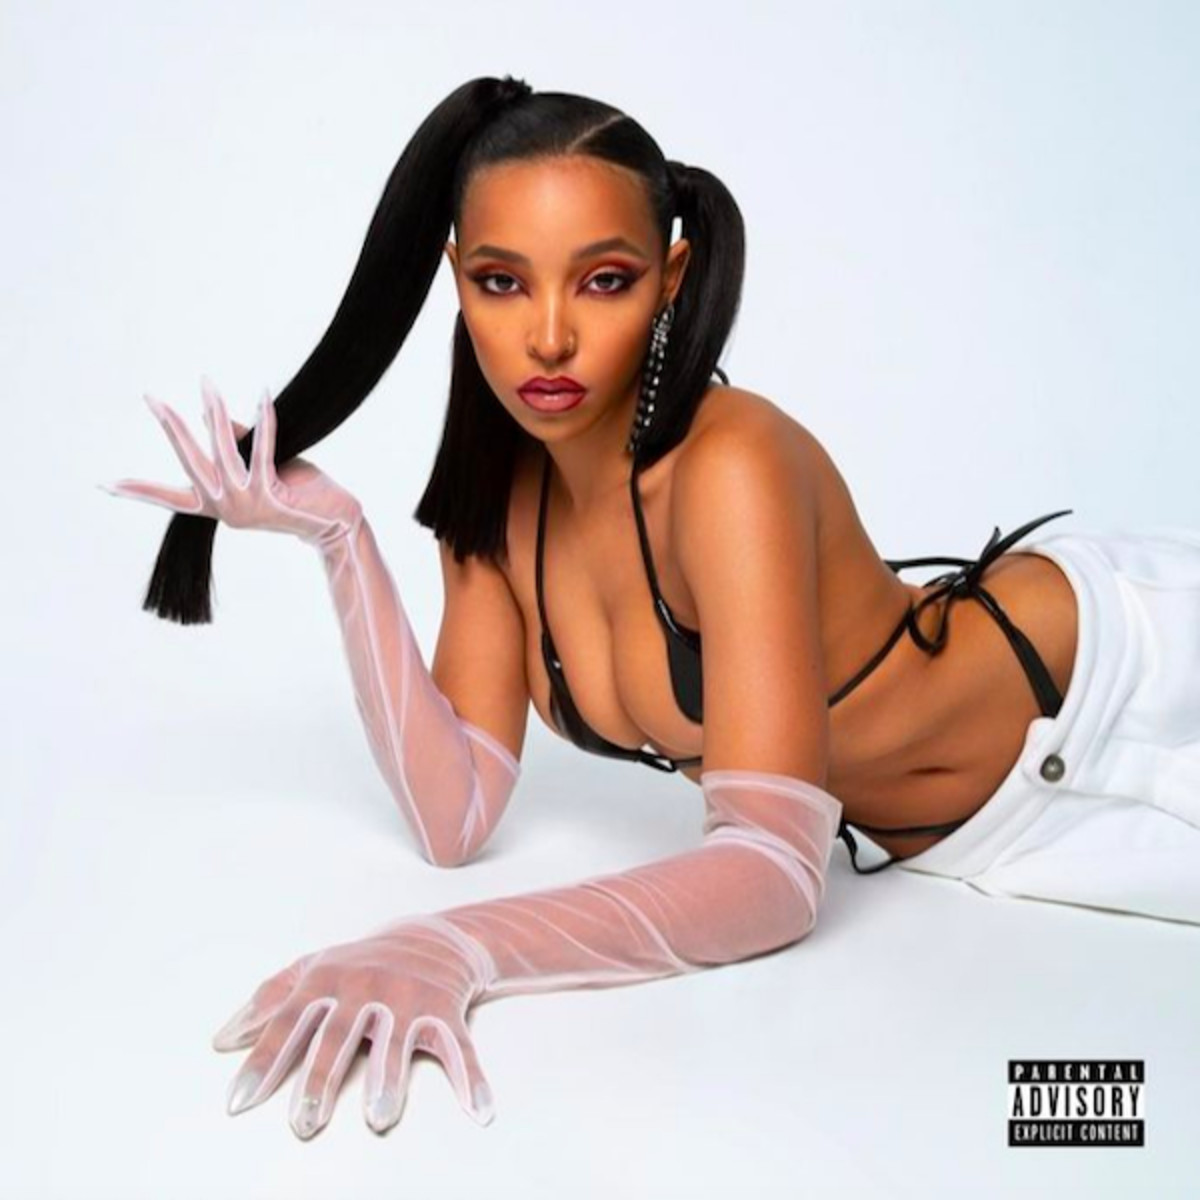 Listen To “Songs For You” By Tinashe